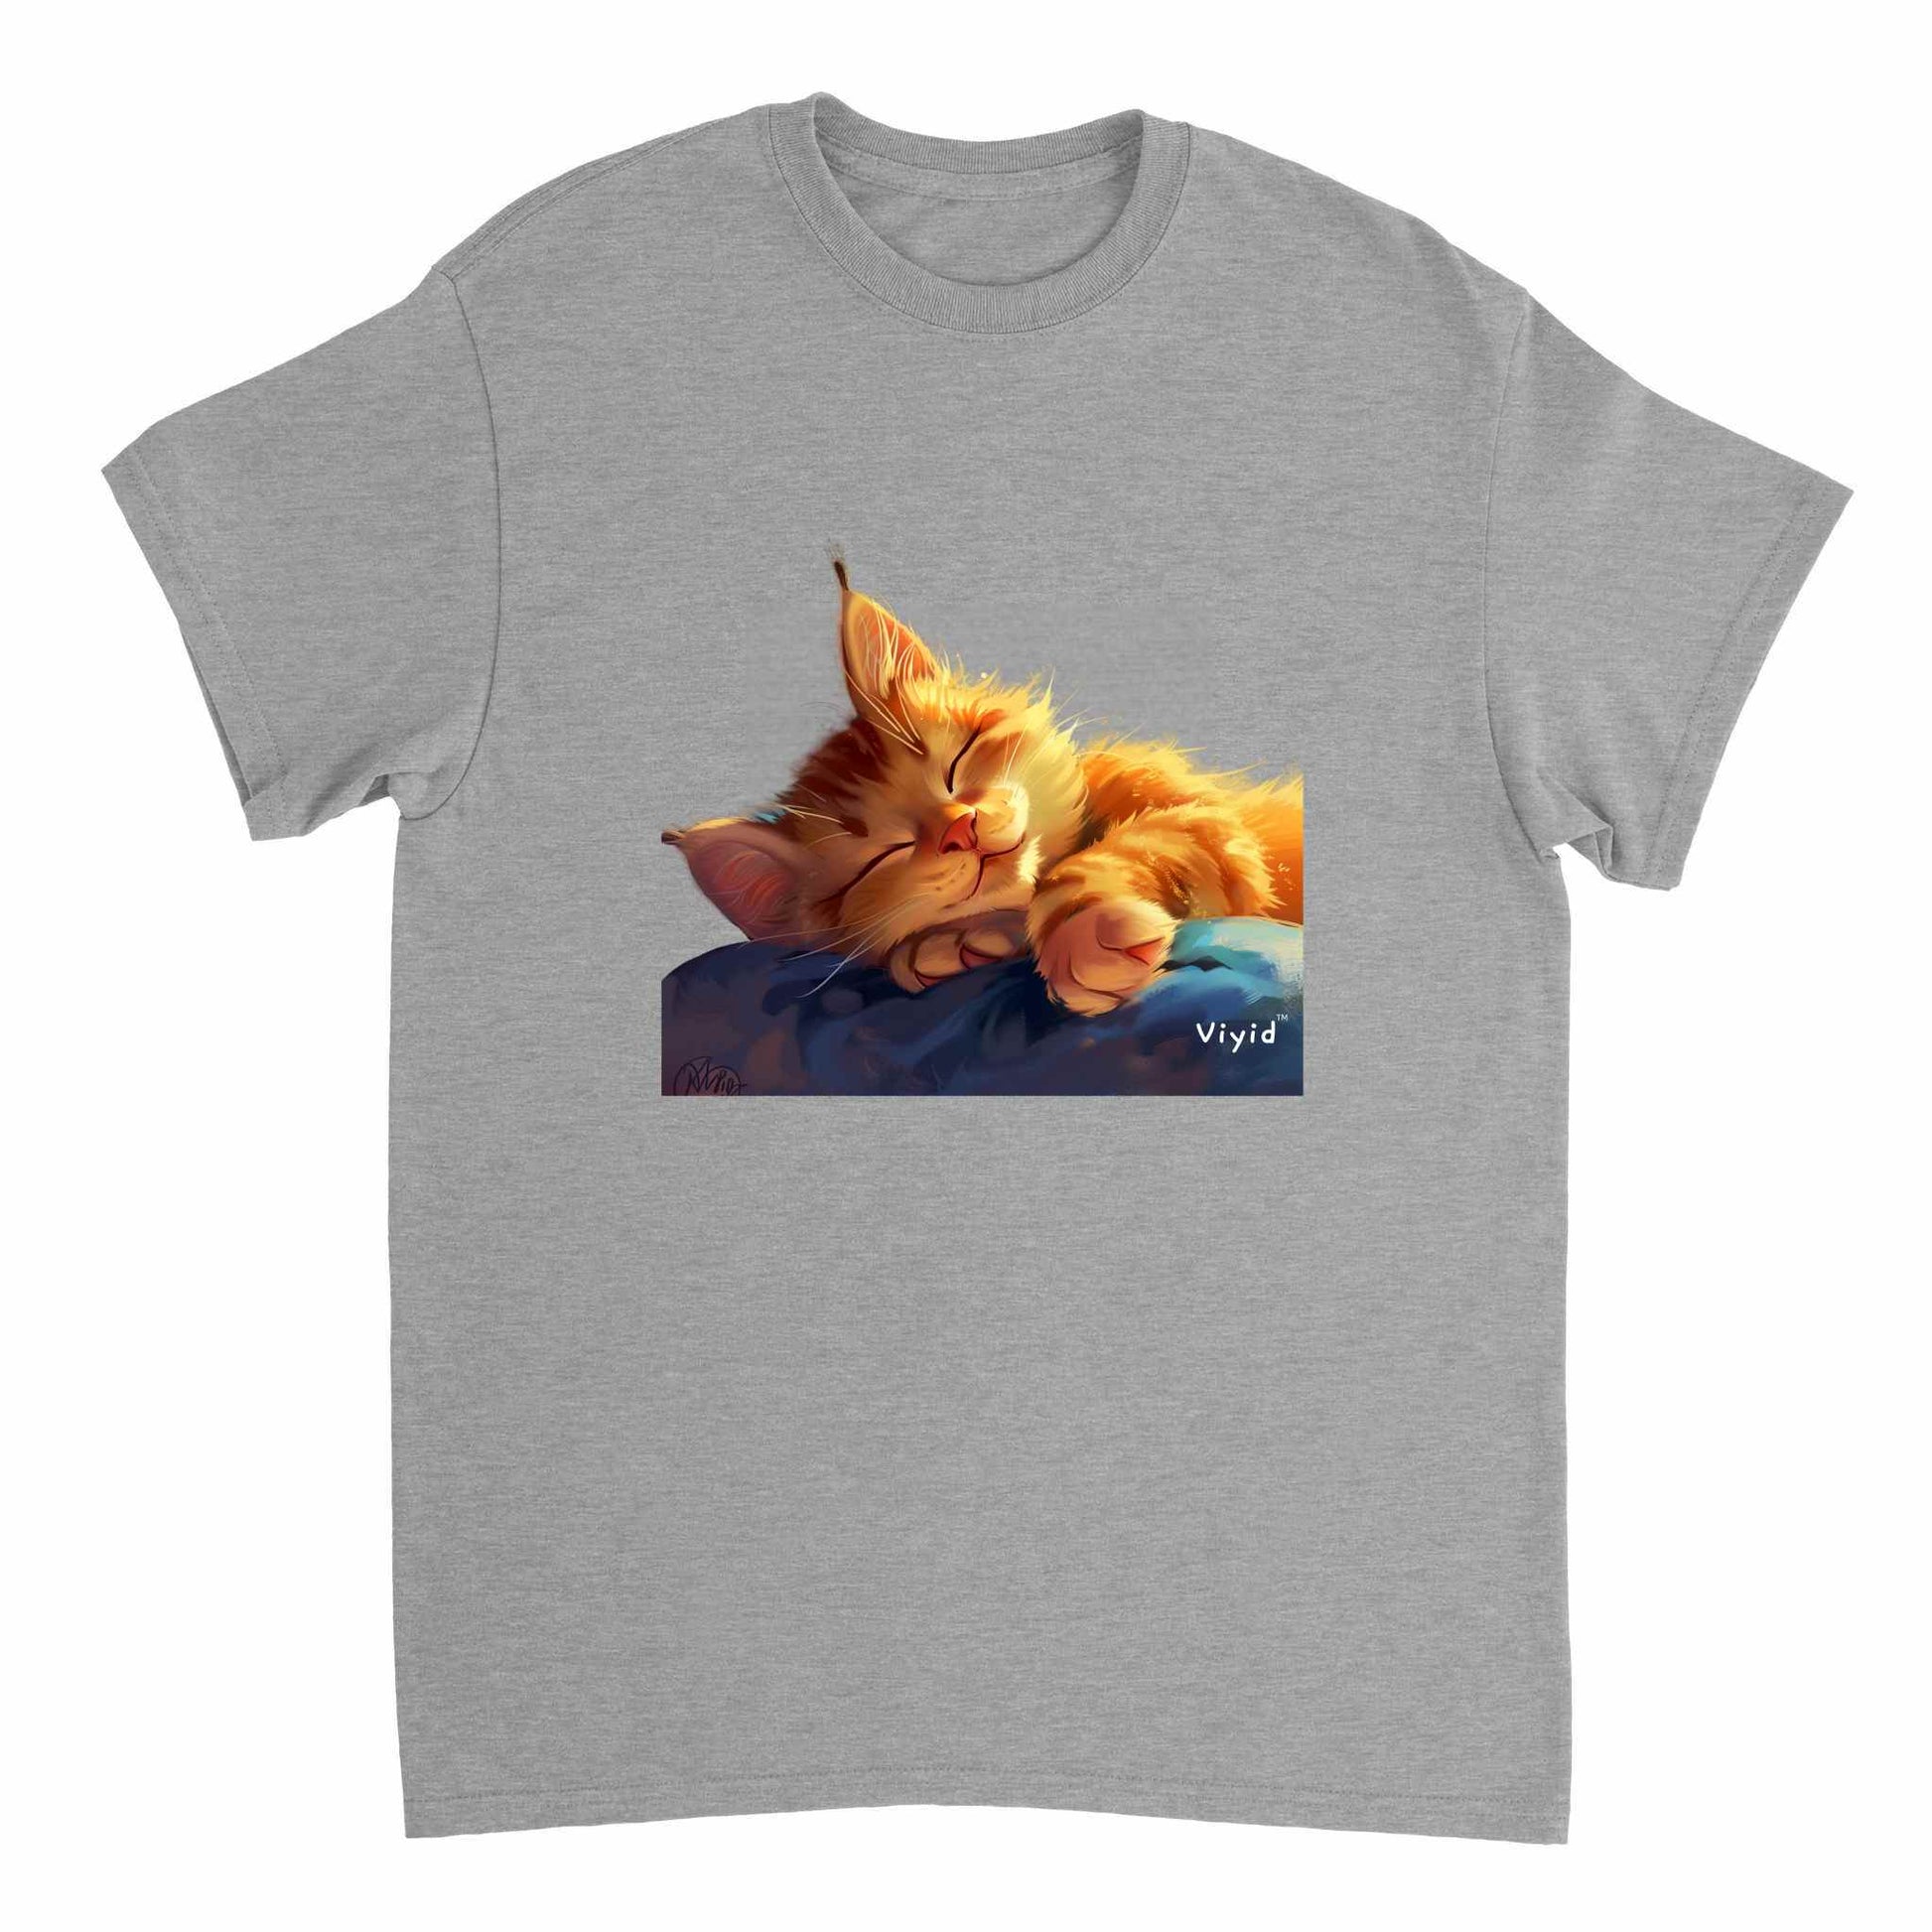 sleeping ginger cat youth t-shirt sports grey